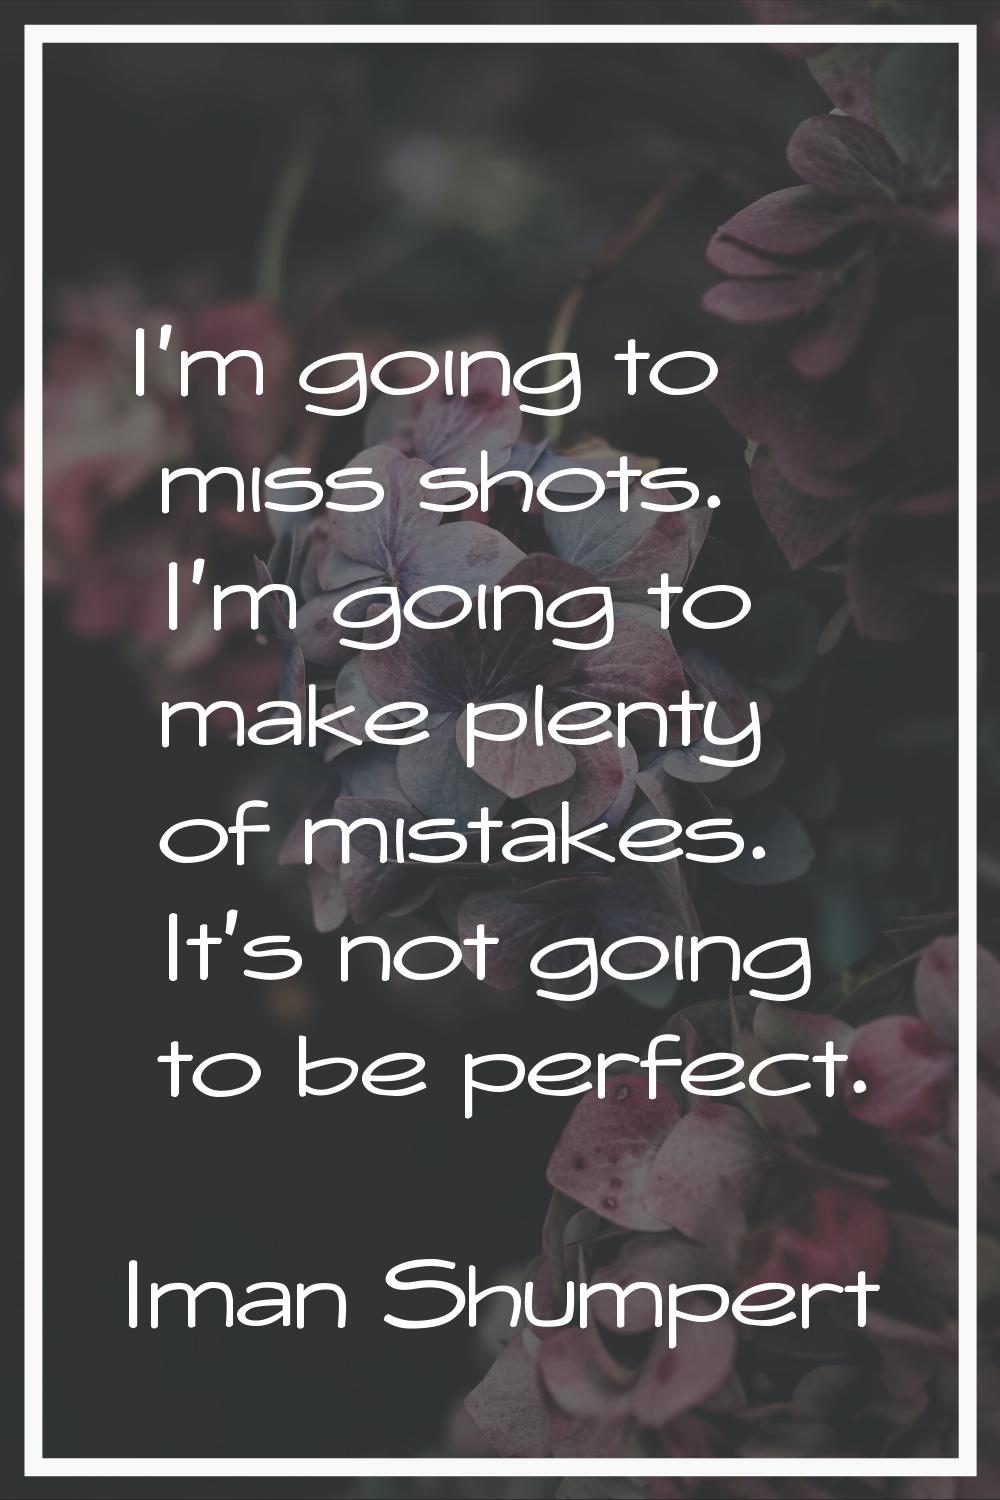 I'm going to miss shots. I'm going to make plenty of mistakes. It's not going to be perfect.